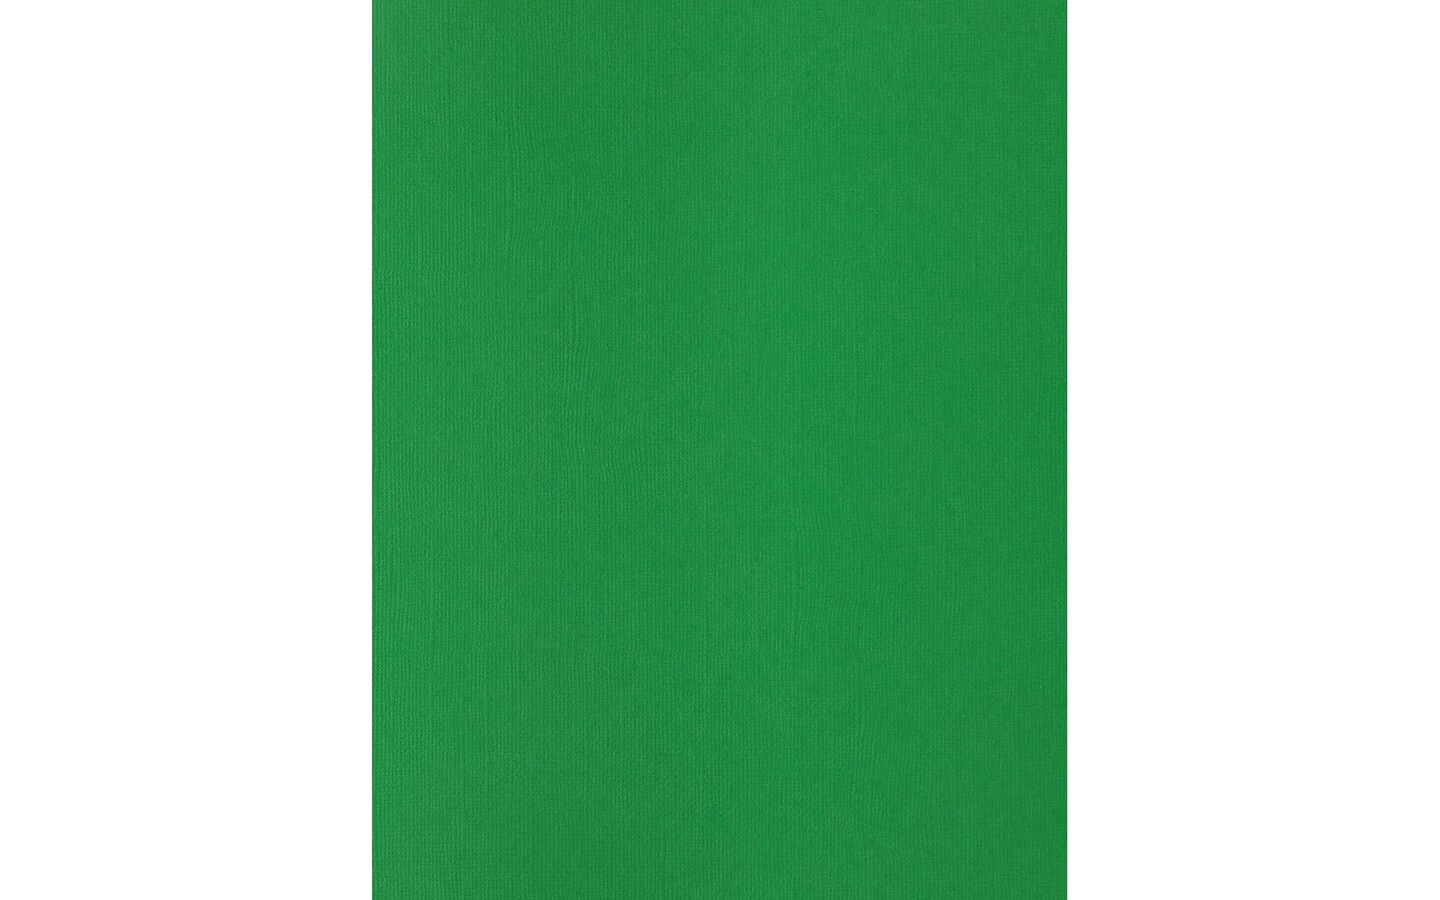 PA Paper Accents Textured Cardstock 8.5&#x22; x 11&#x22; Christmas Green, 73lb colored cardstock paper for card making, scrapbooking, printing, quilling and crafts, 1000 piece box